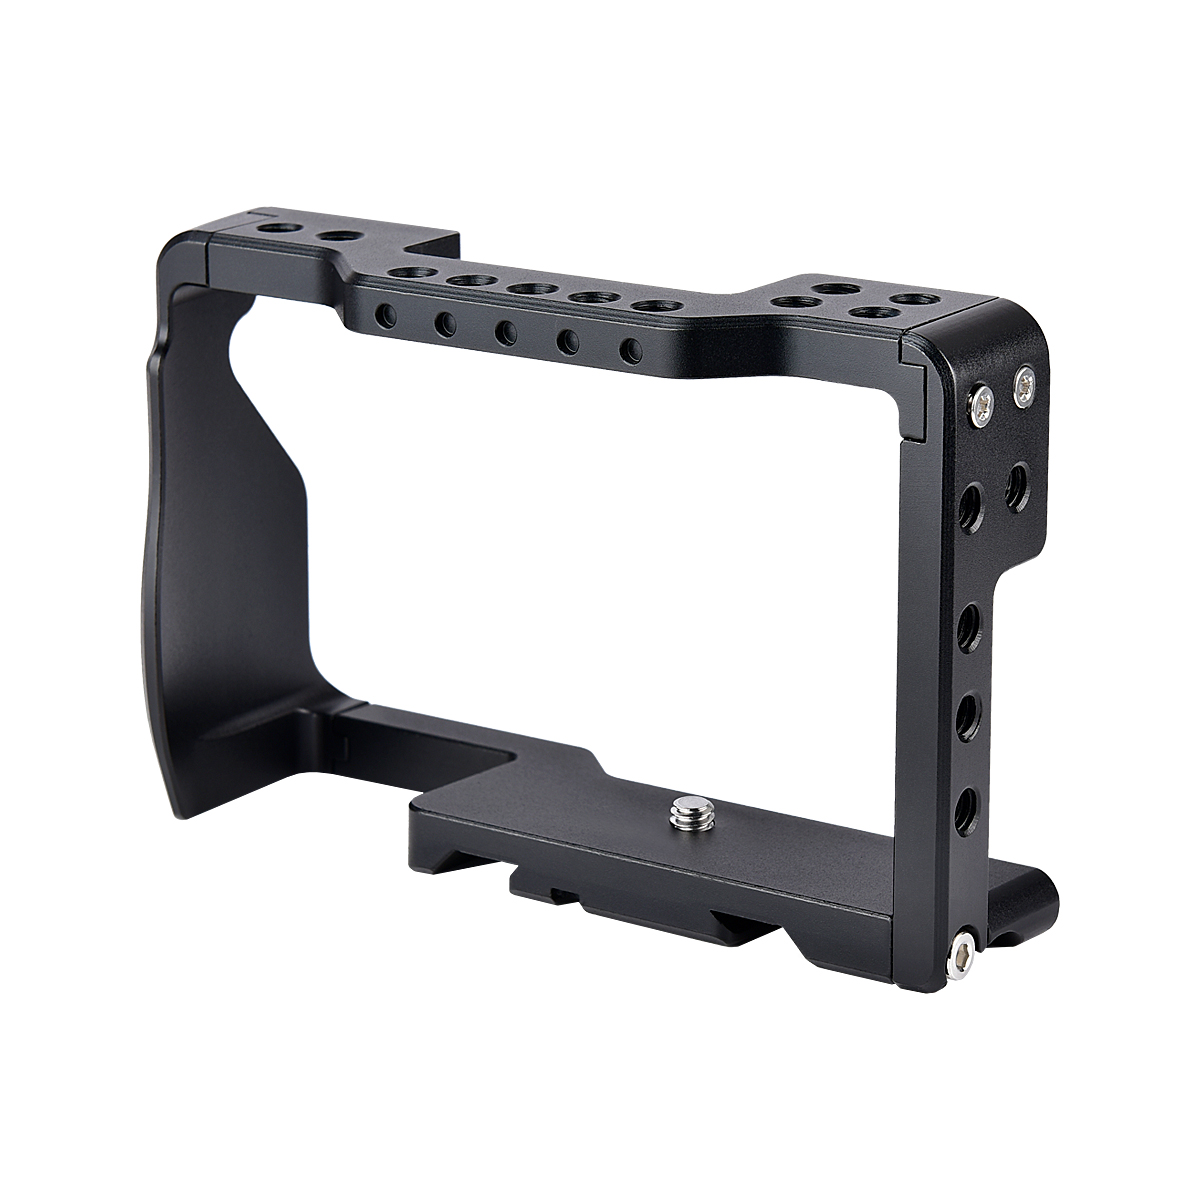 MeterMall Fashion for DSLR Camera Rabbit Cage Universal for Sony A6 Series Aluminum Alloy Cage Handheld Stabilizer Photography Bracket 